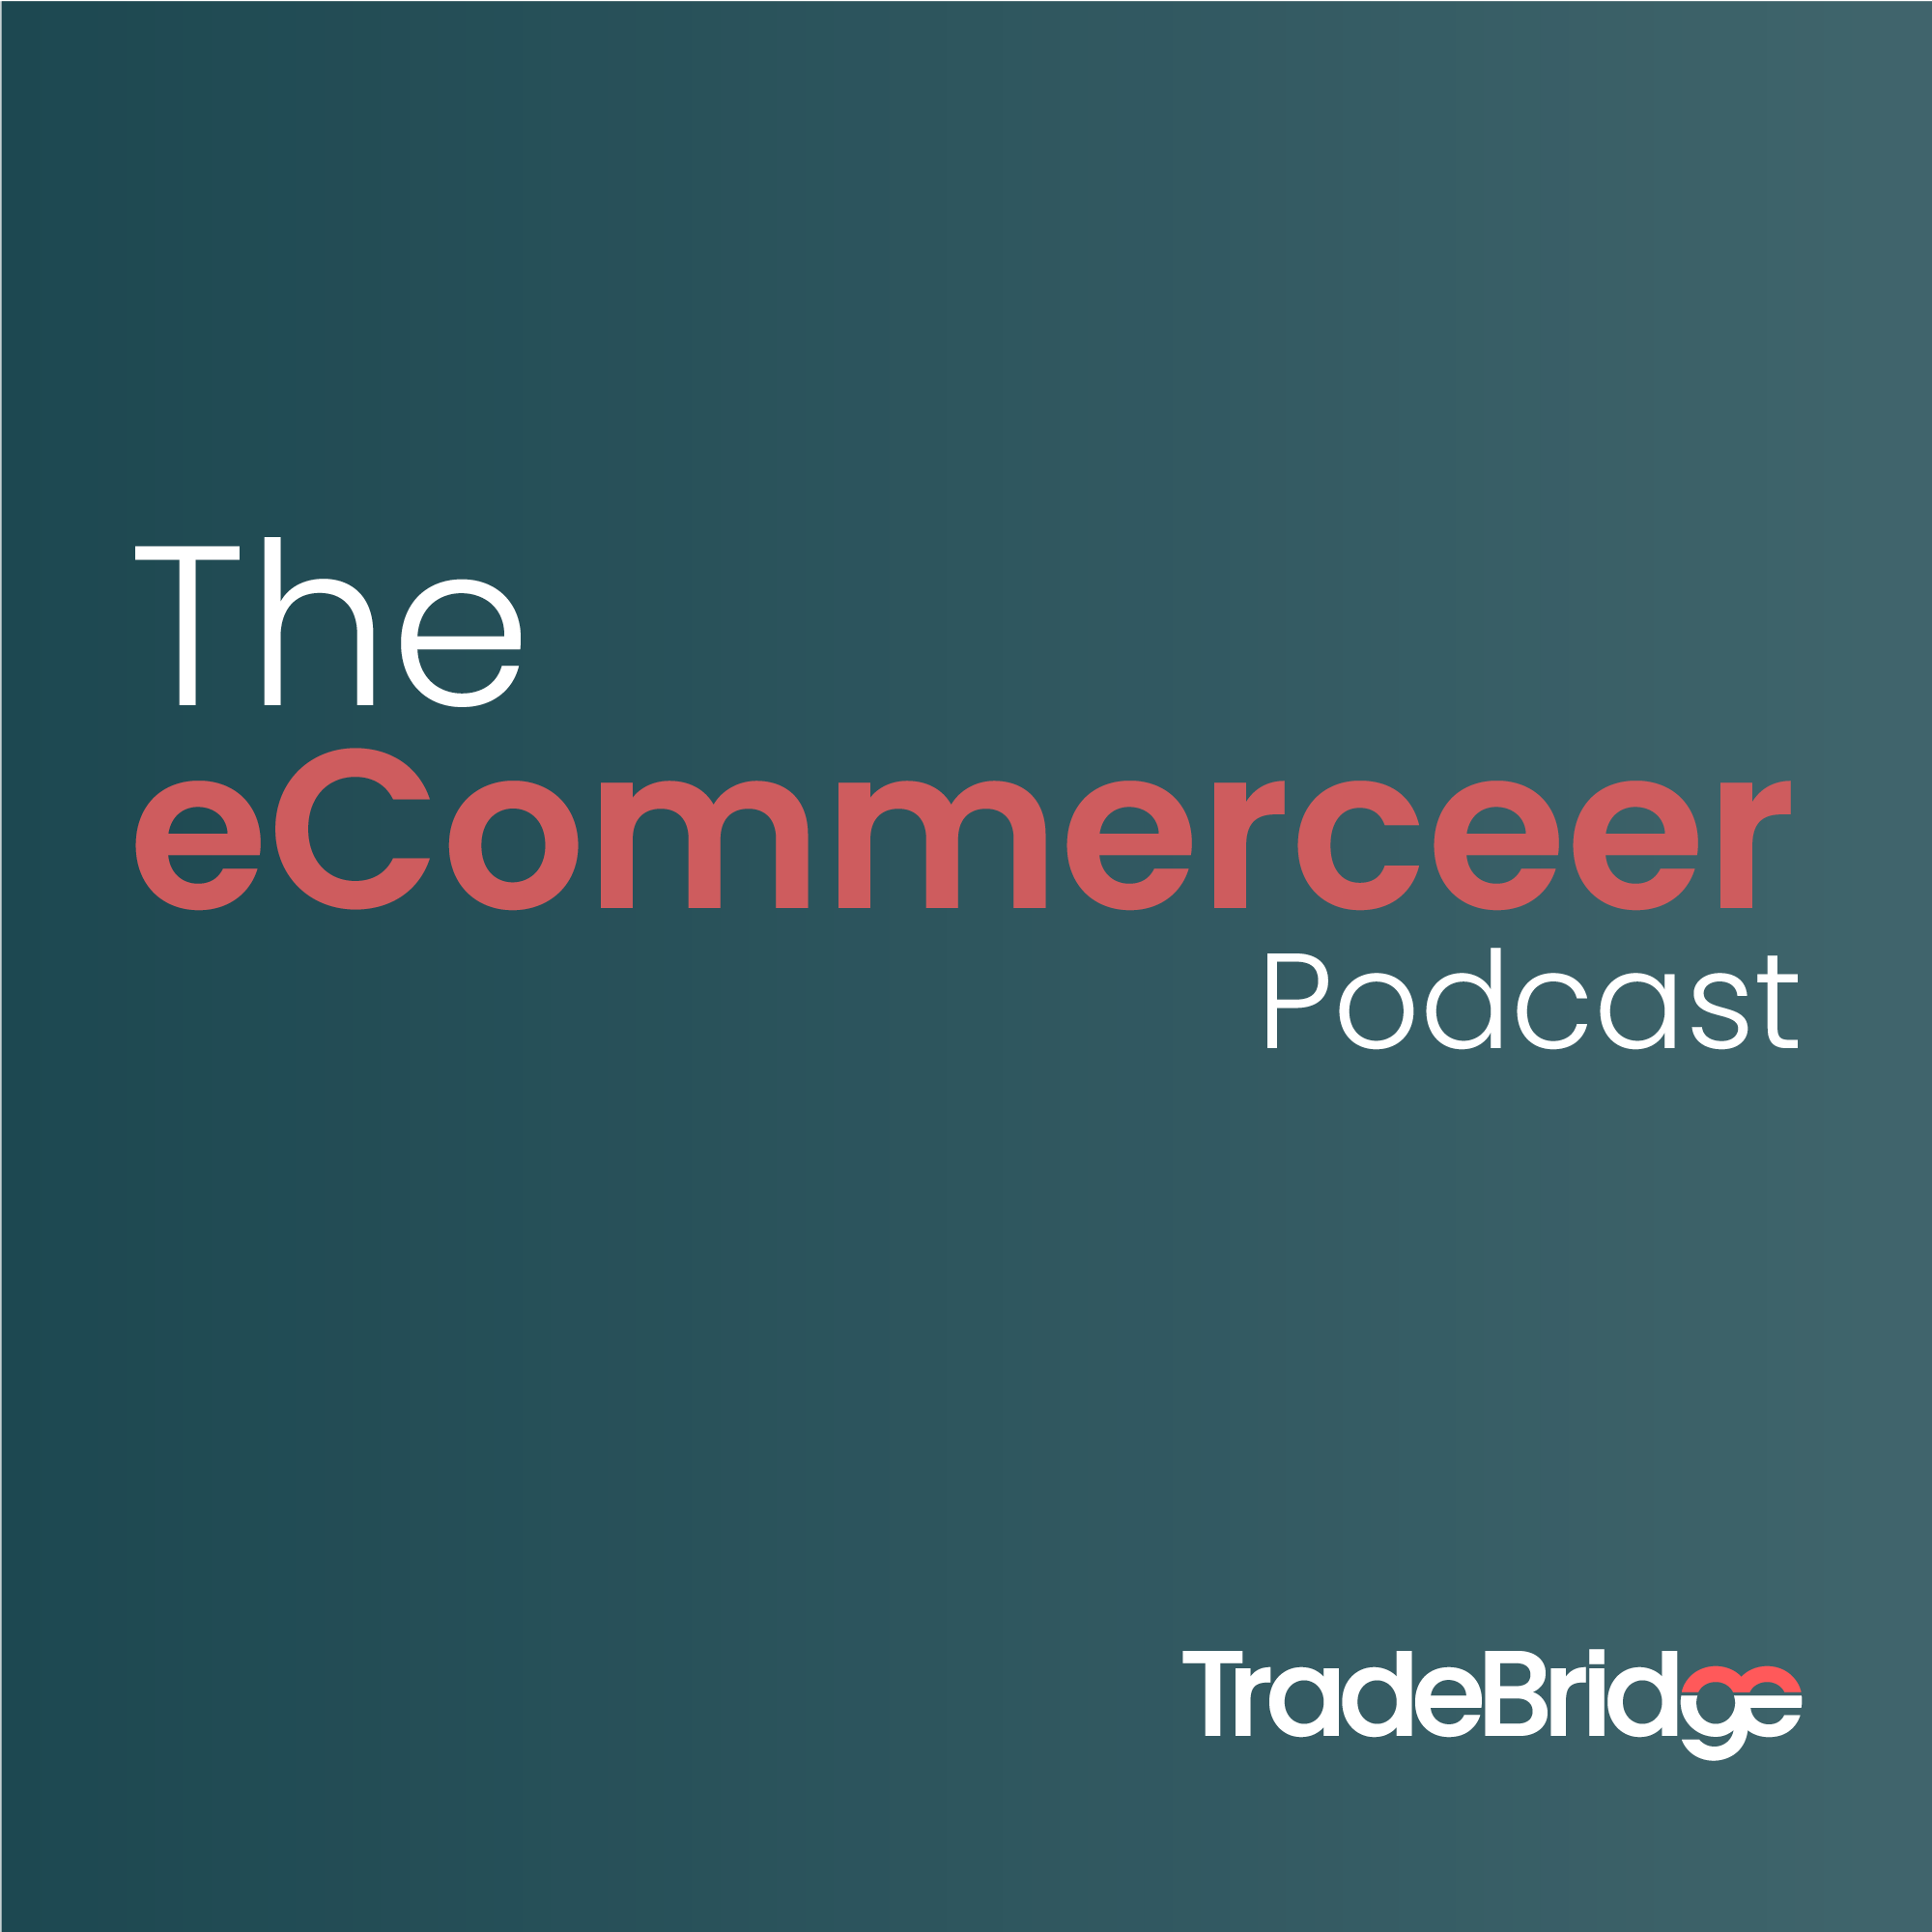 The eCommerceer Podcast